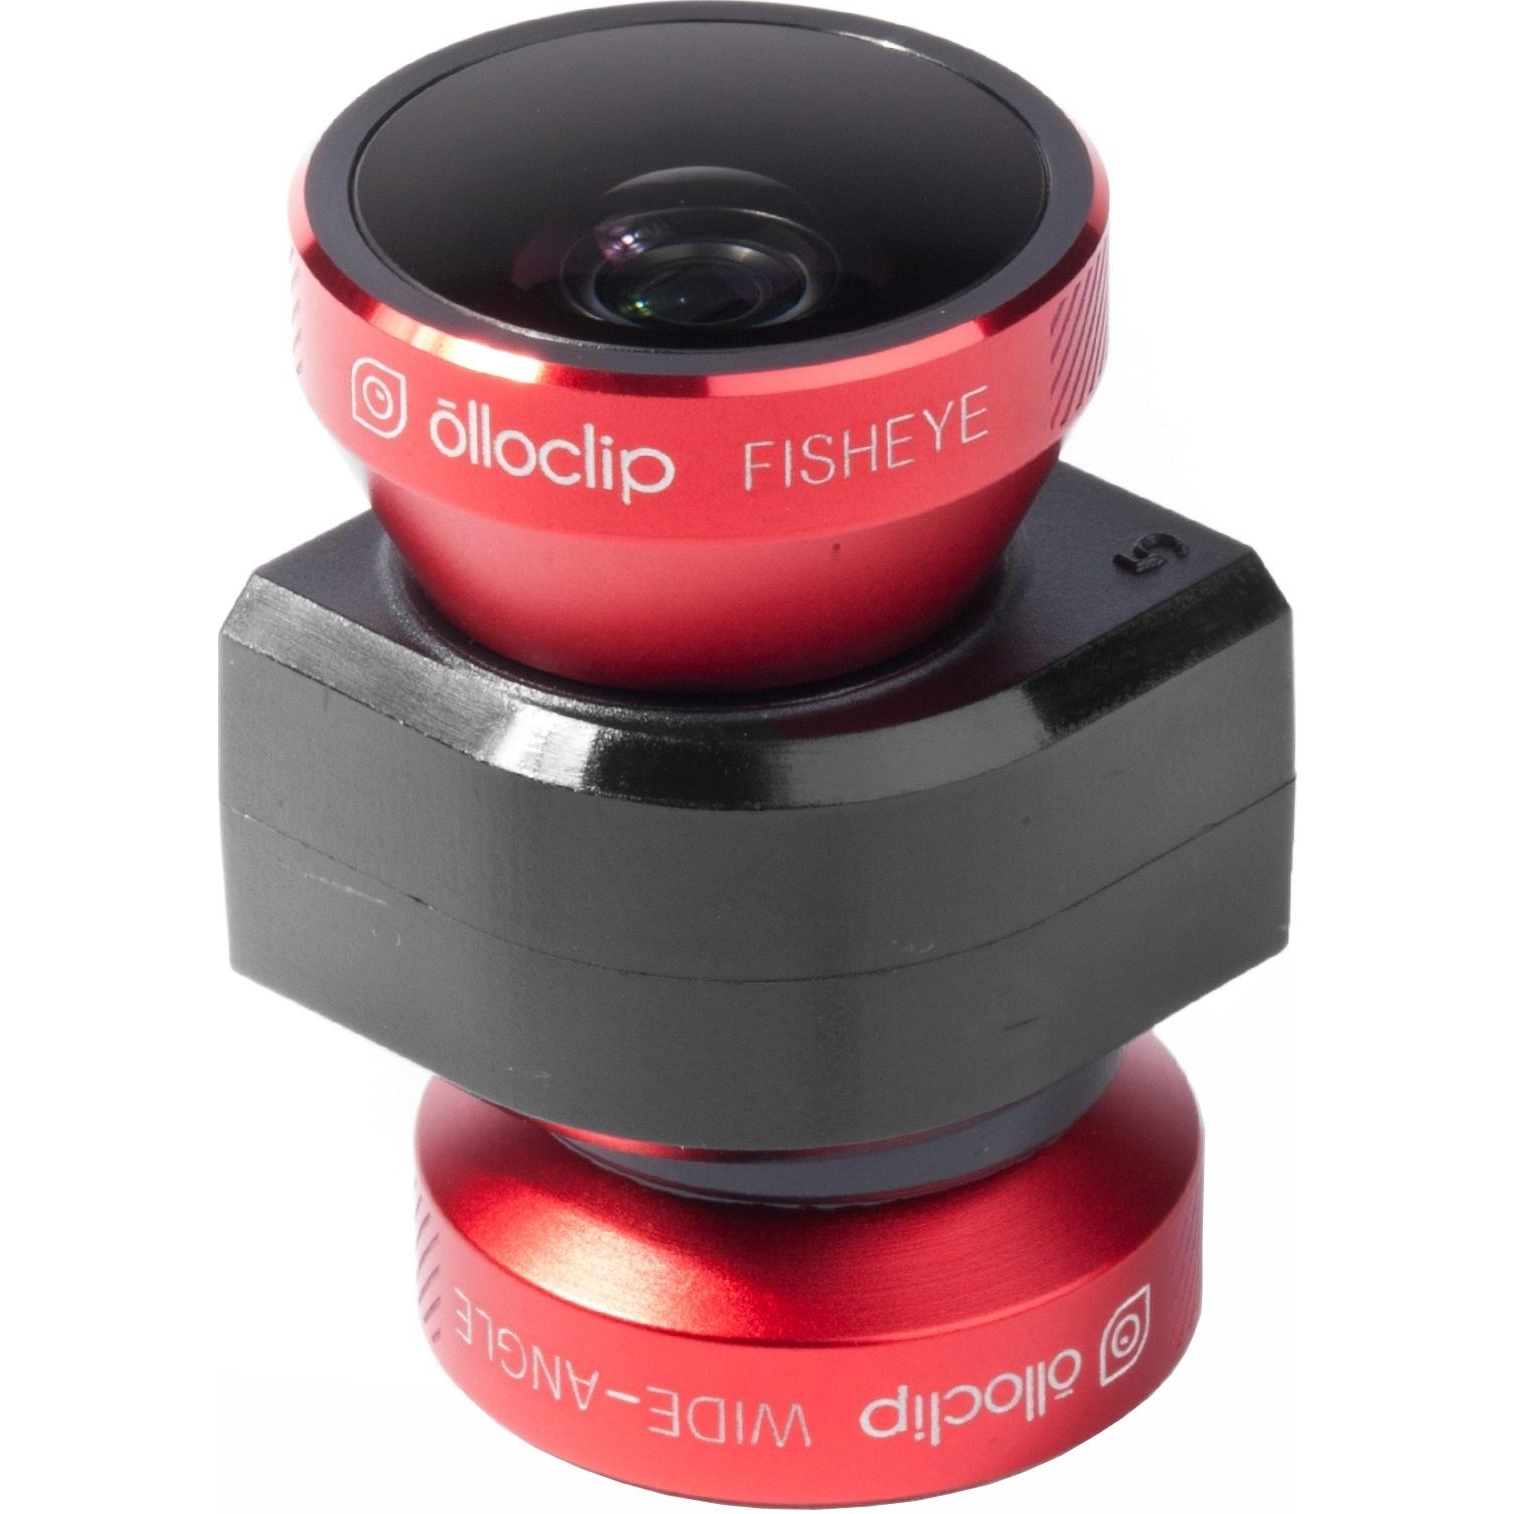 Olloclip 4-IN-1 Photo Lens for iPhone 5/5s - зображення 1